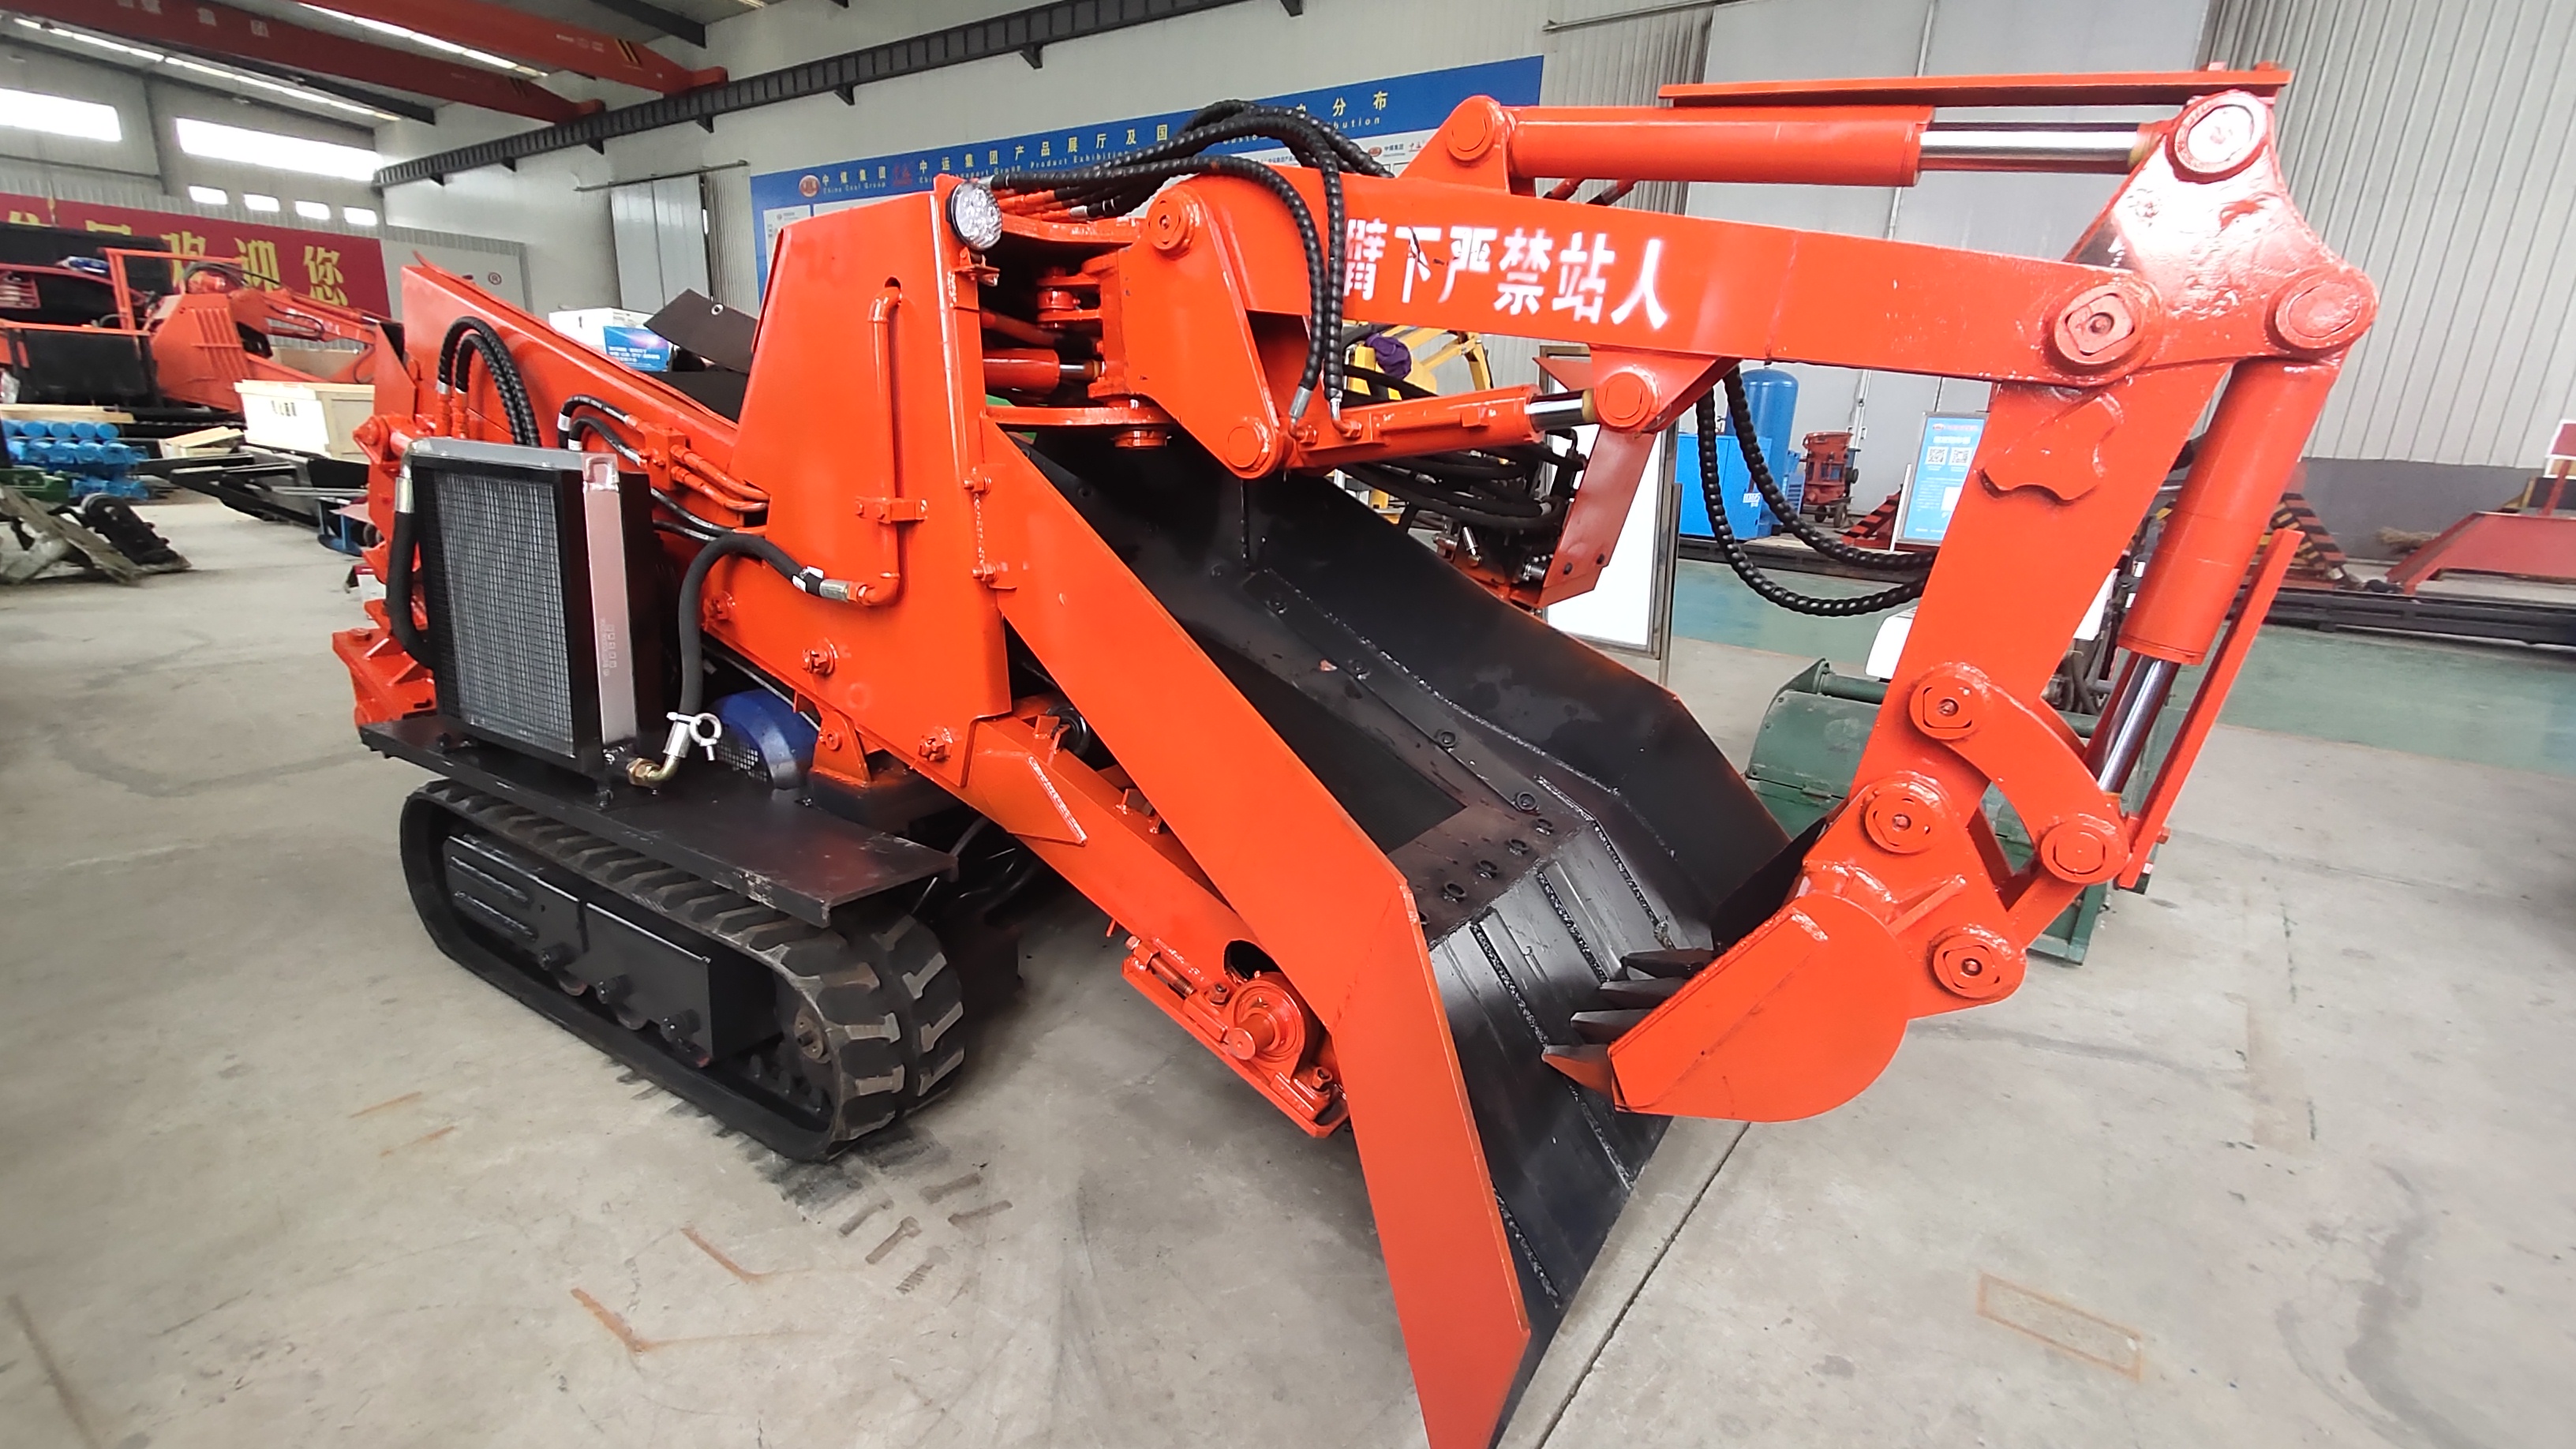 How To Reduce The Malfunction Of The Mini Mucking Loader Hydraulic System?